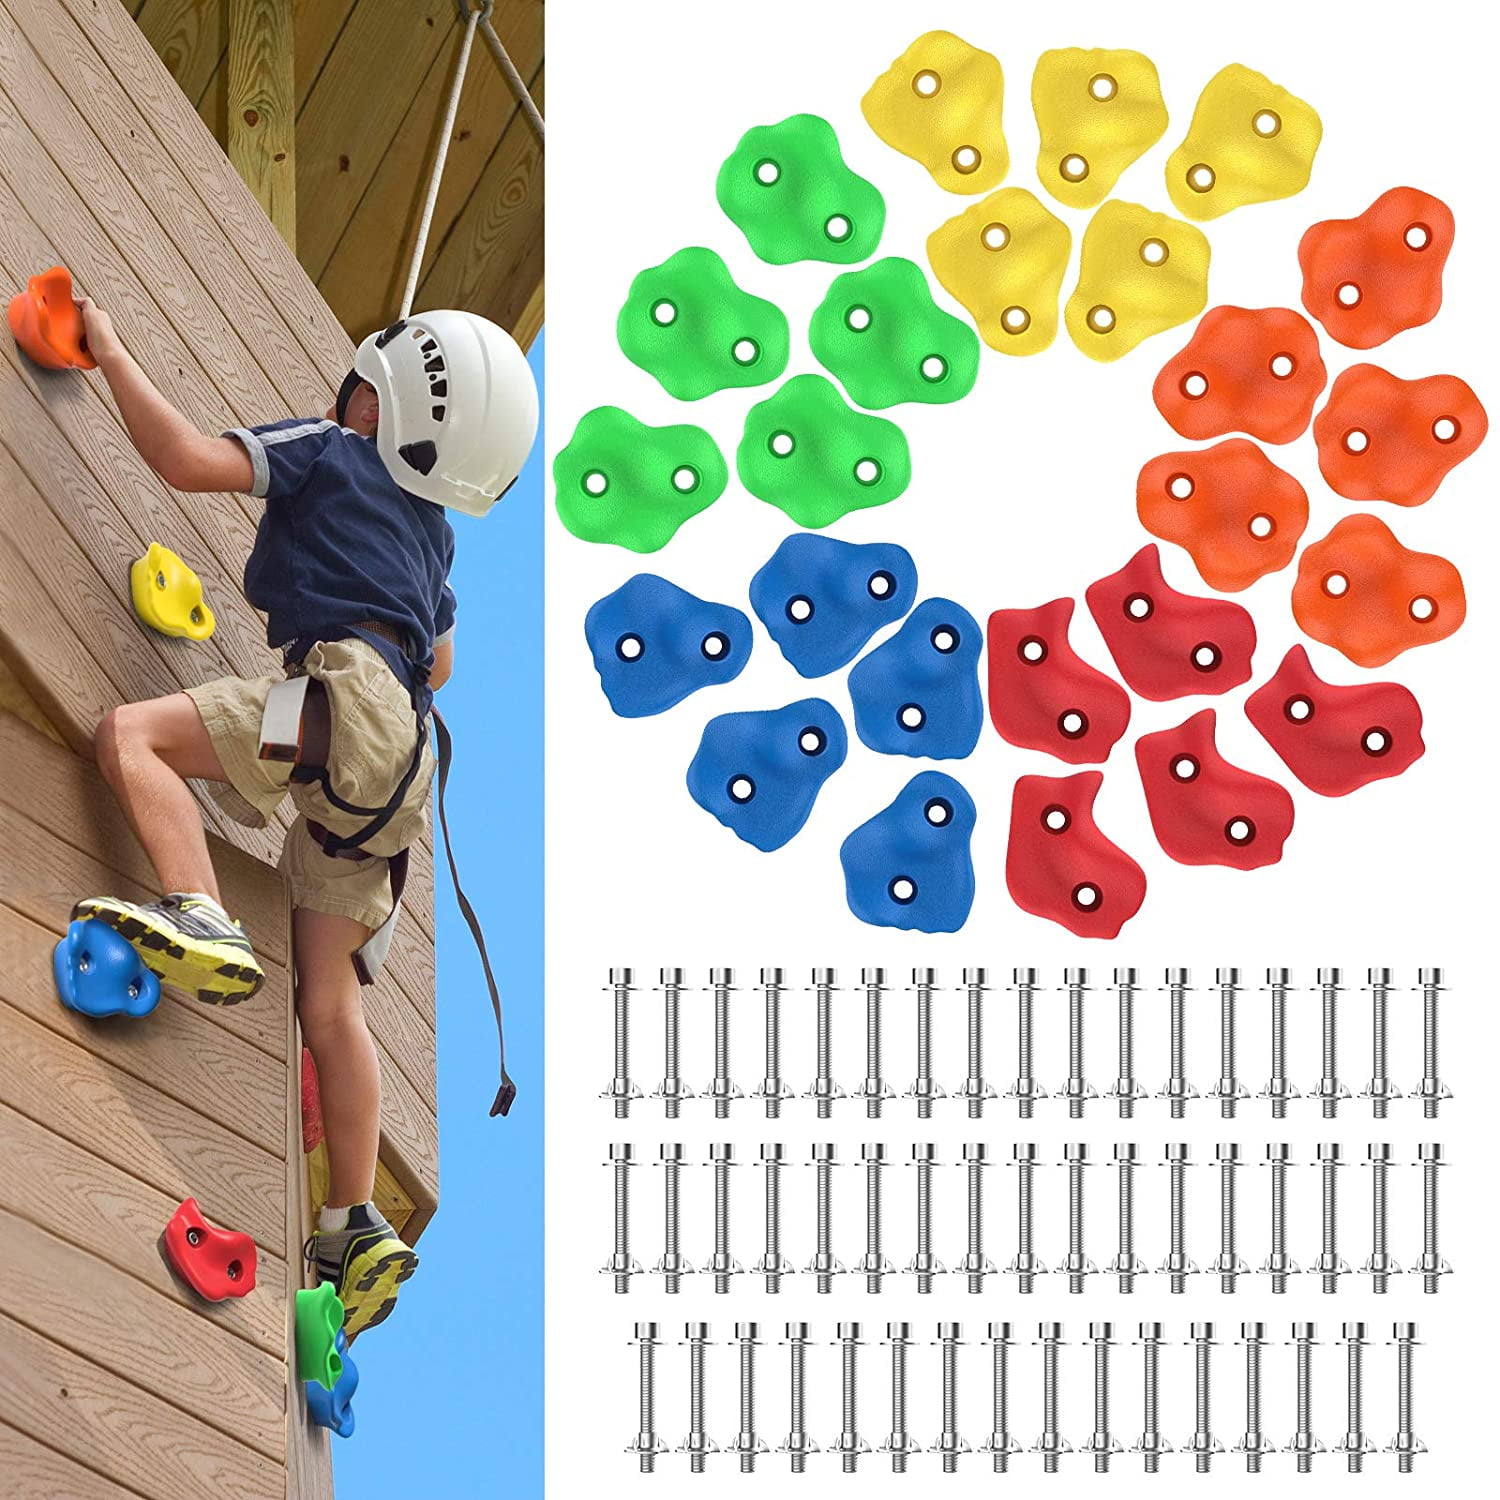 New 20pc Large Rock Climbing Holds Stones Adults/Kids Outdoor/Indoor Playground 